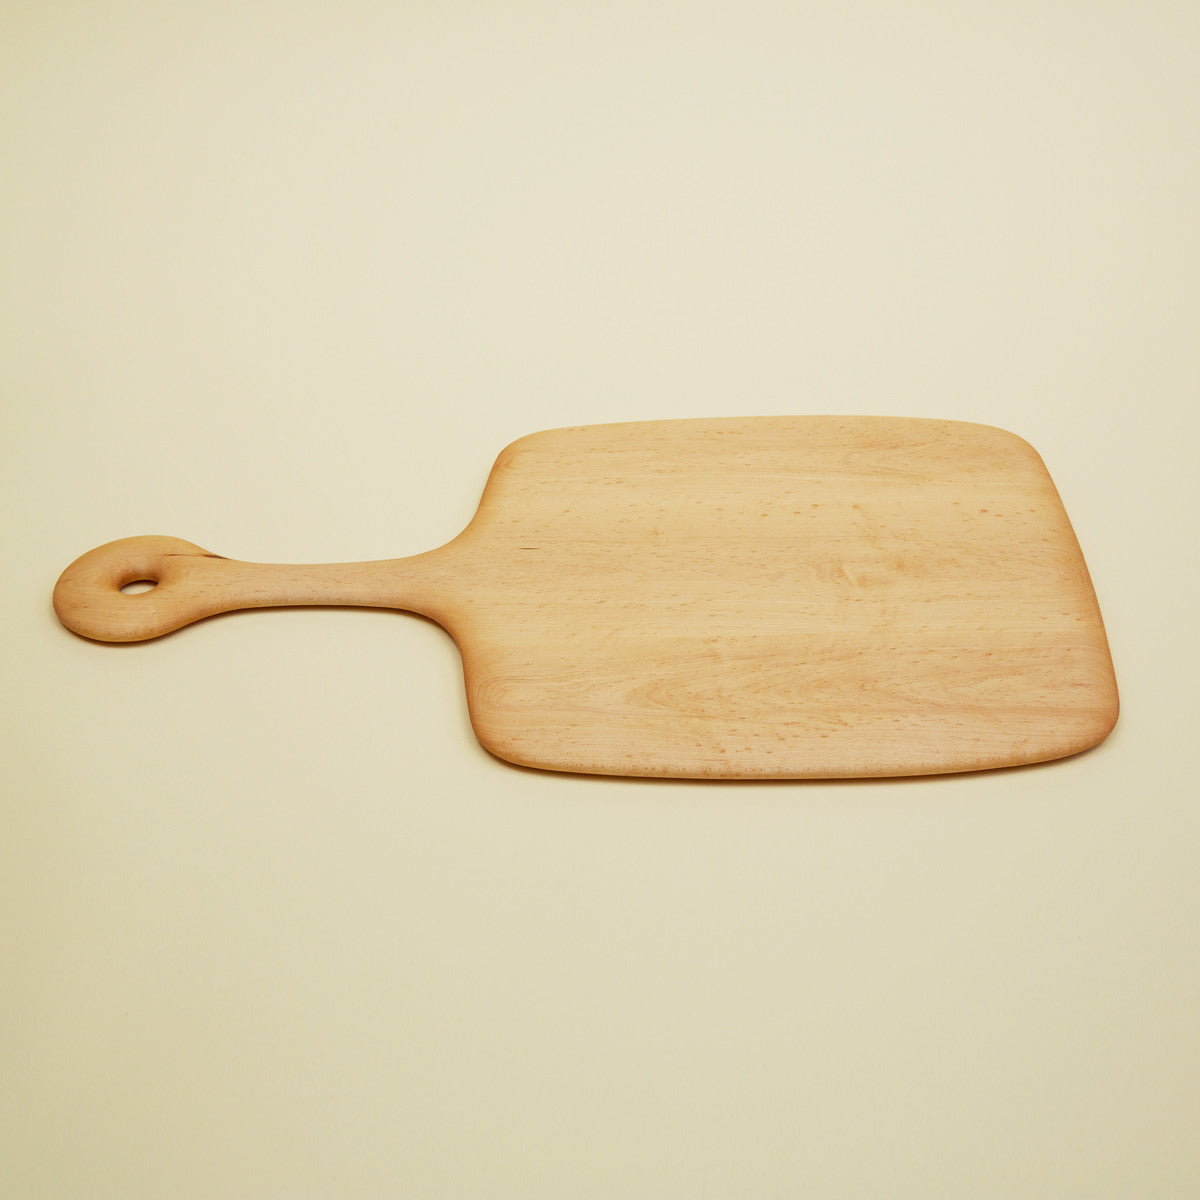 Maple Cutting Board with Handle - 12 x 22.5